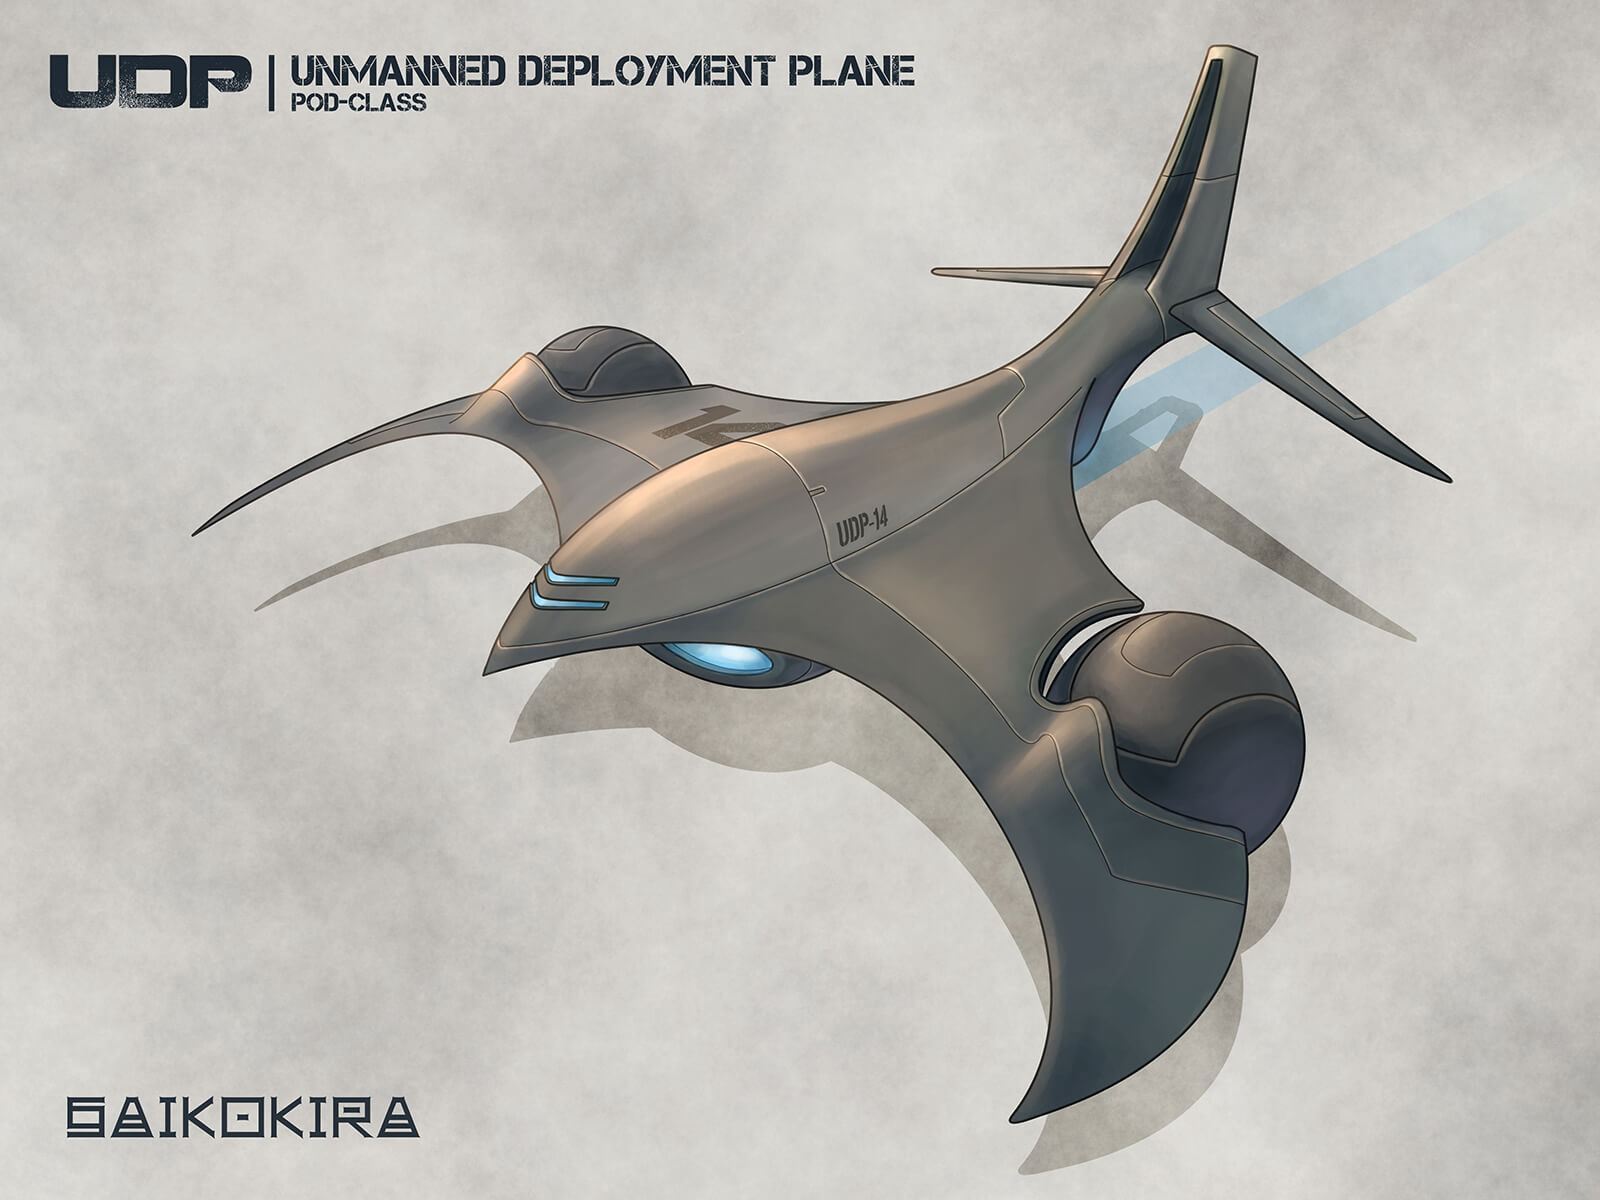 Sketch of a futuristic gray-metal, jet-powered flying vehicle, including spherical pods attached to its swept wings.